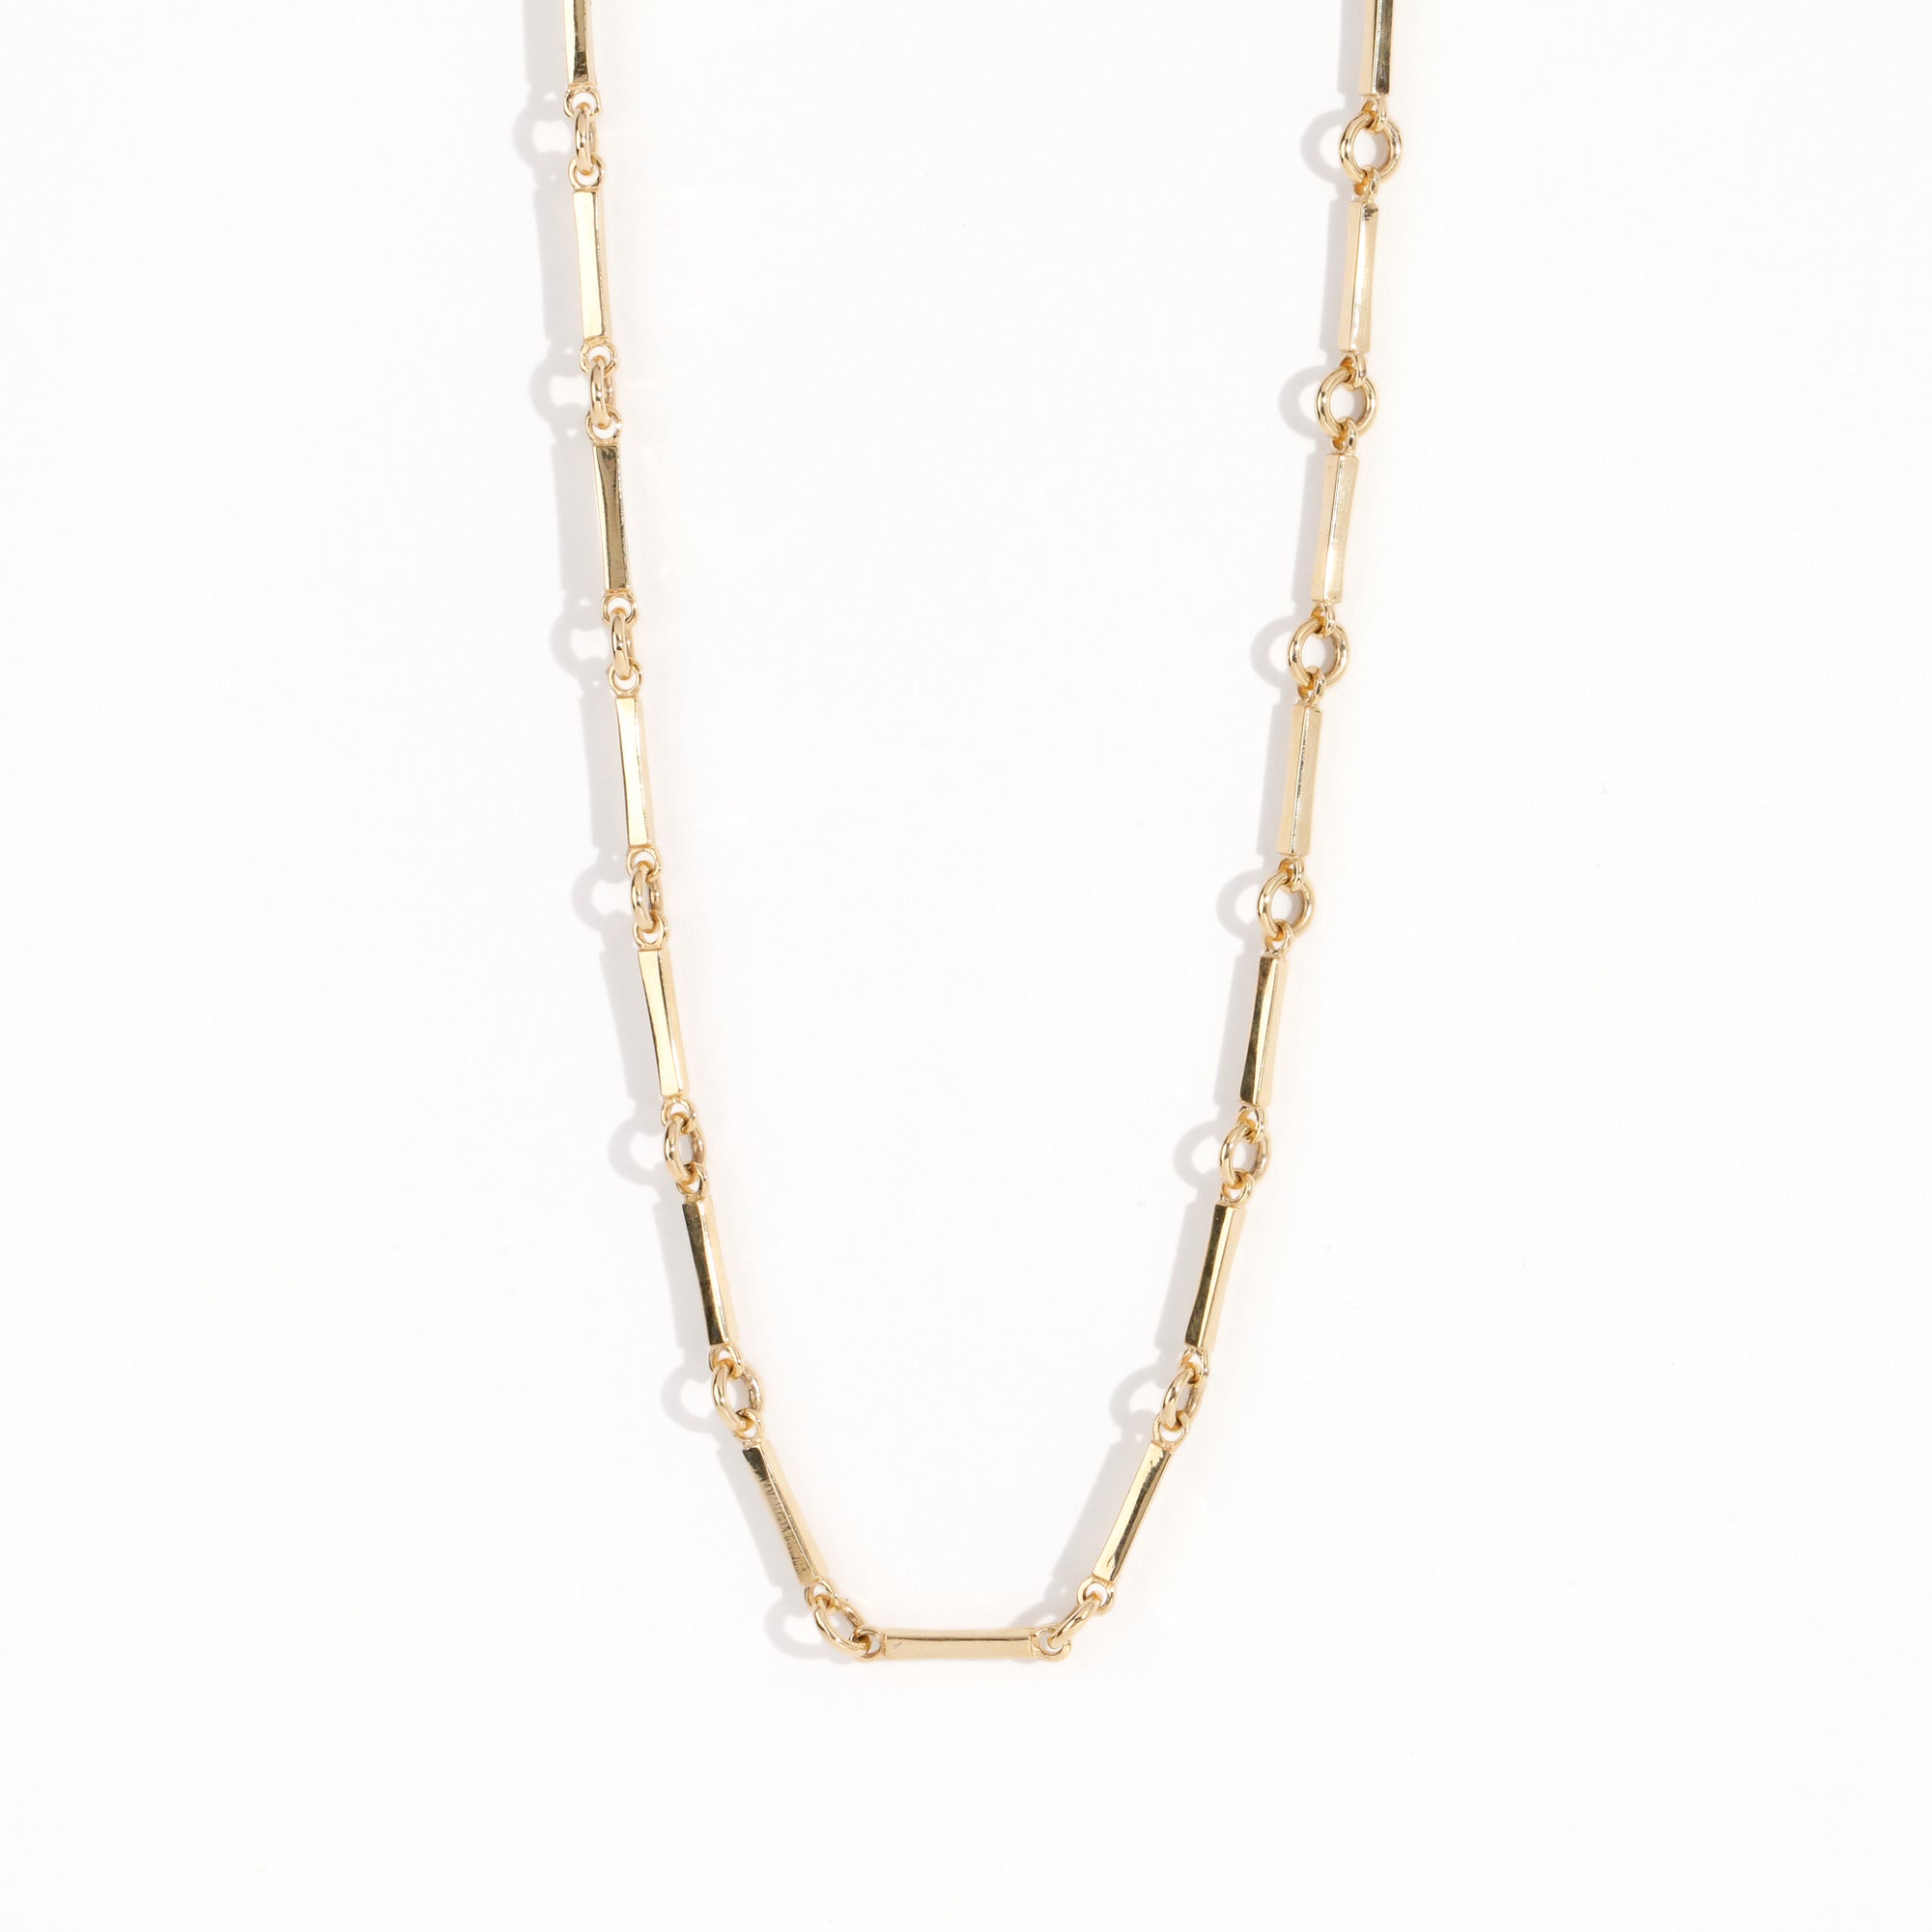 Bar and loop style necklace in solid 9ct yellow gold